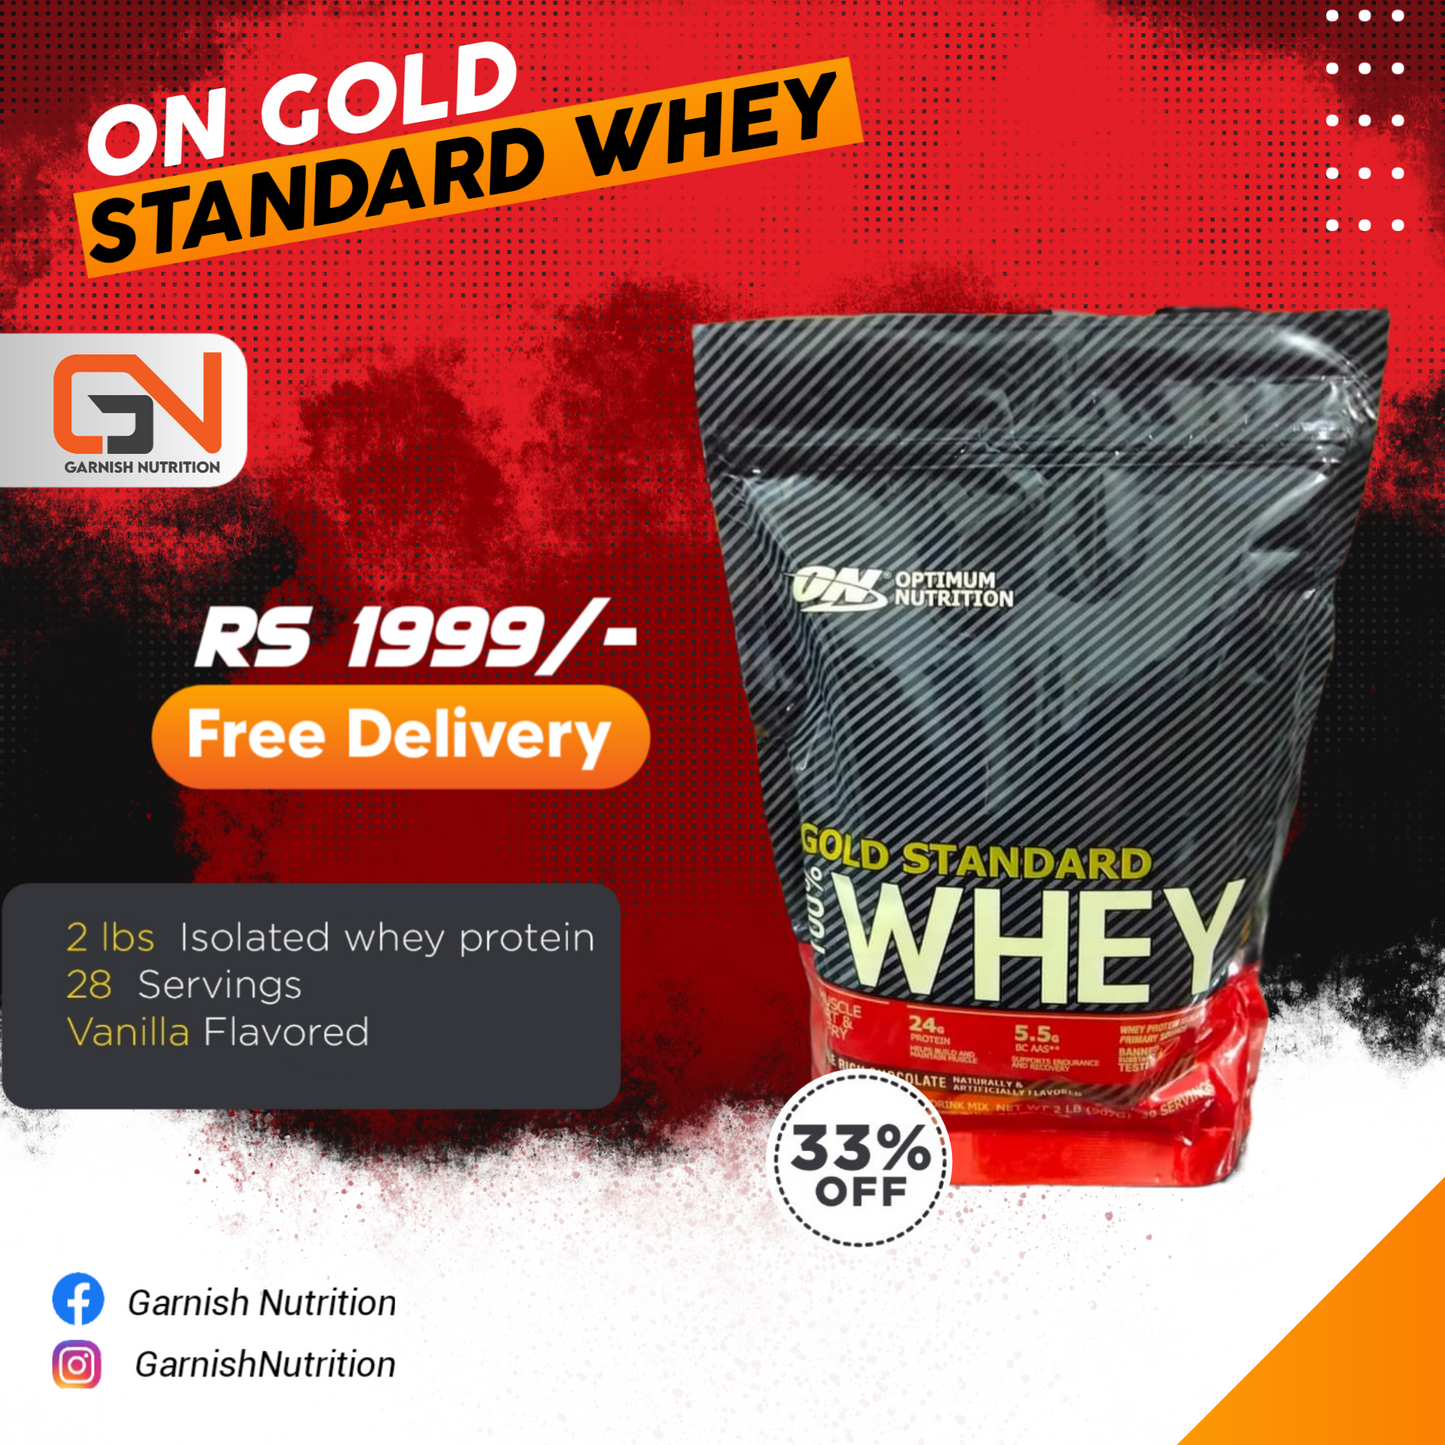 On Gold standard Whey